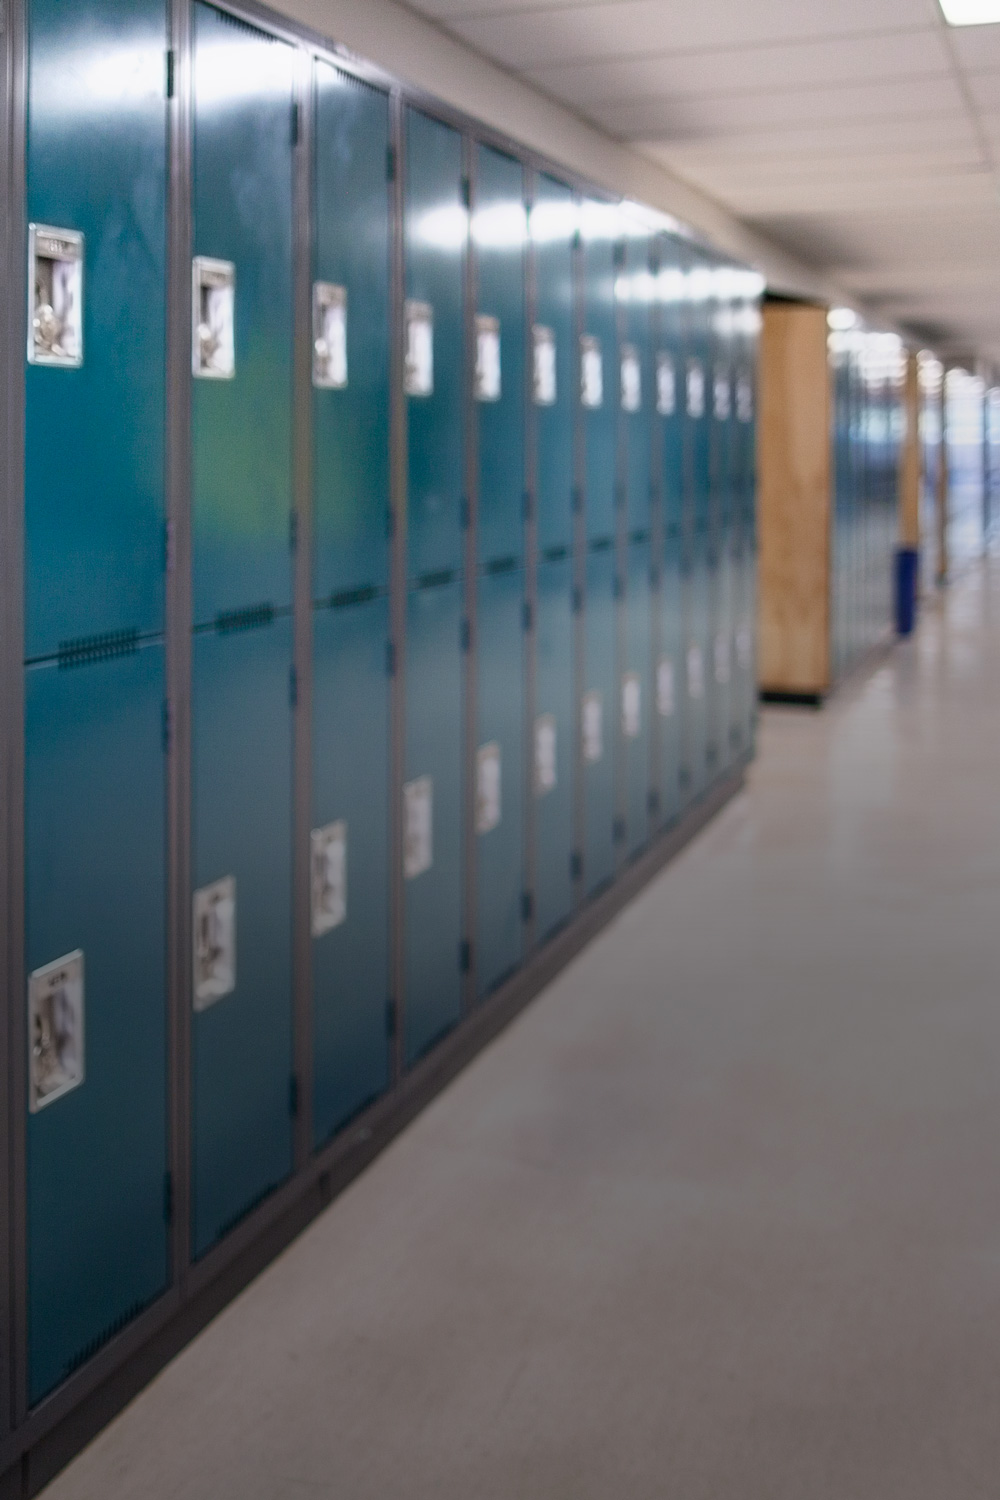 photo - Close up of a row of school lockers